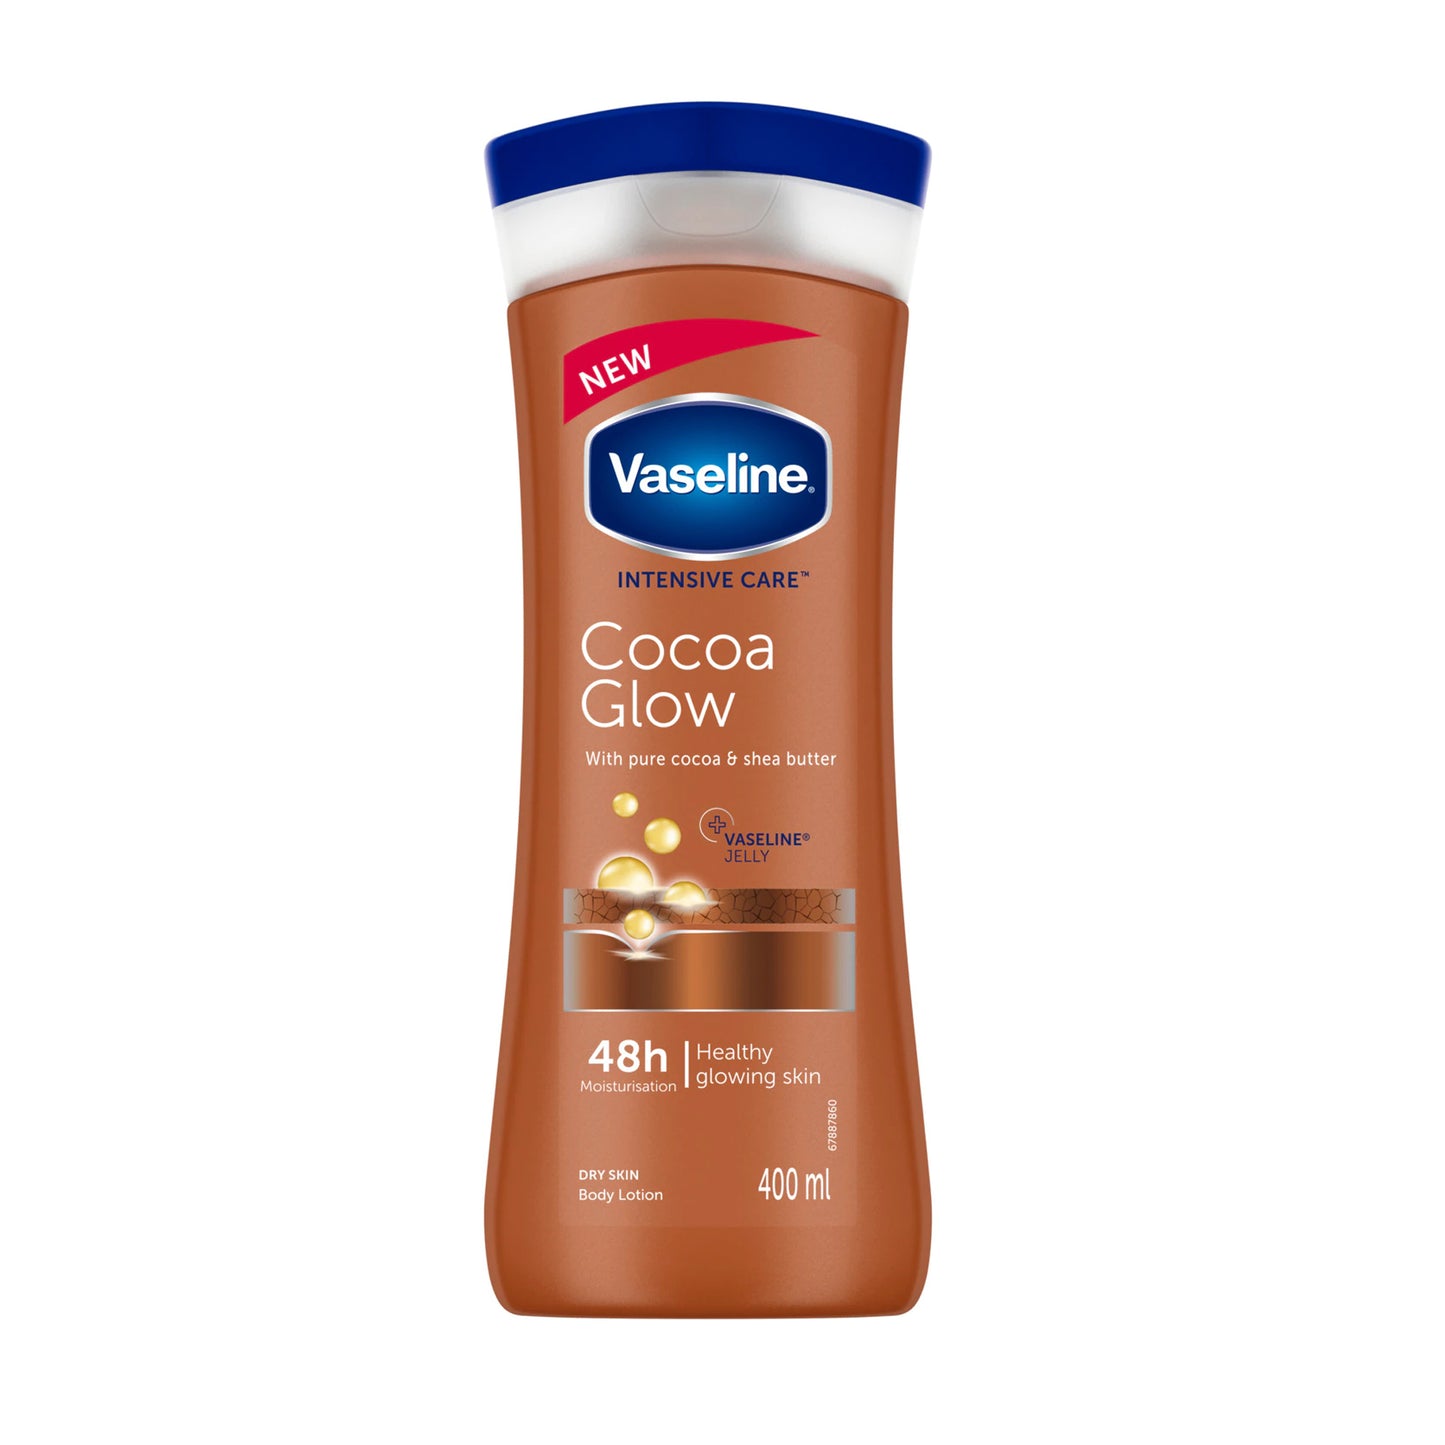 VASELINE - INTENSIVE CARE COCOA GLOW BODY LOTION WITH PURE COCOA & SHEA BUTTER - 400ML